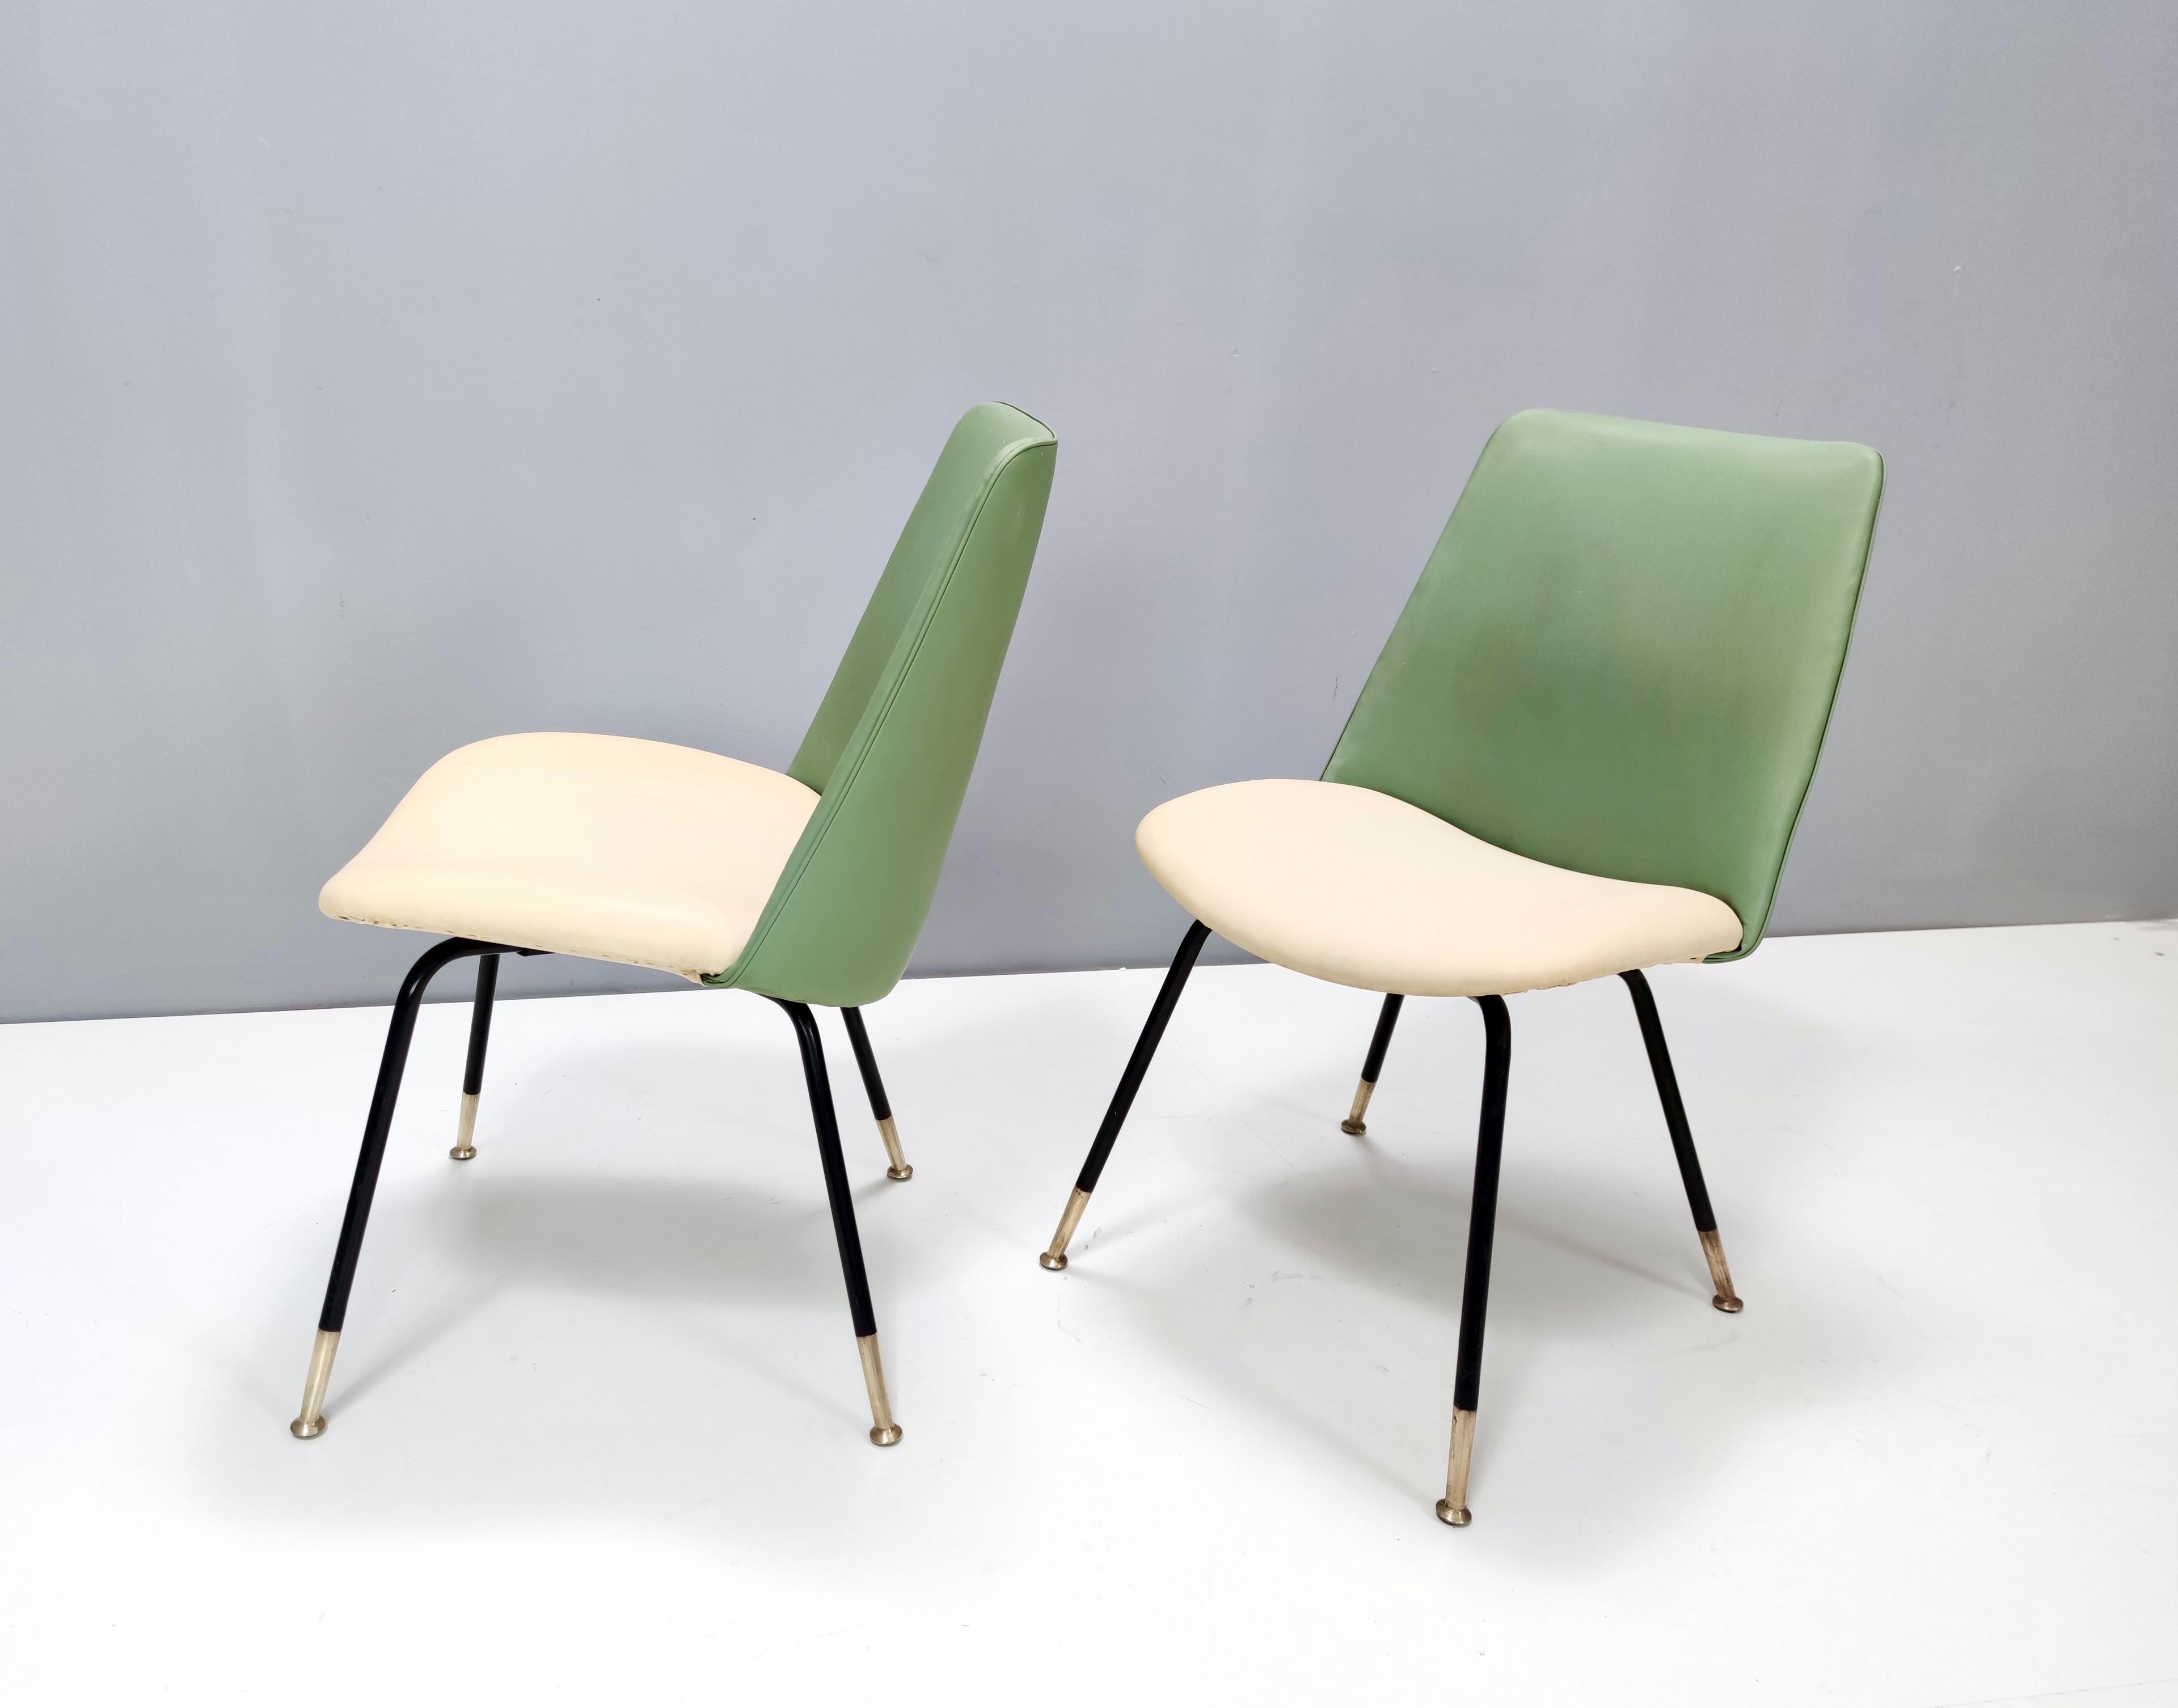 Varnished Pair of Green and Ivory Side Chairs by Gastone Rinaldi for Rima, Italy